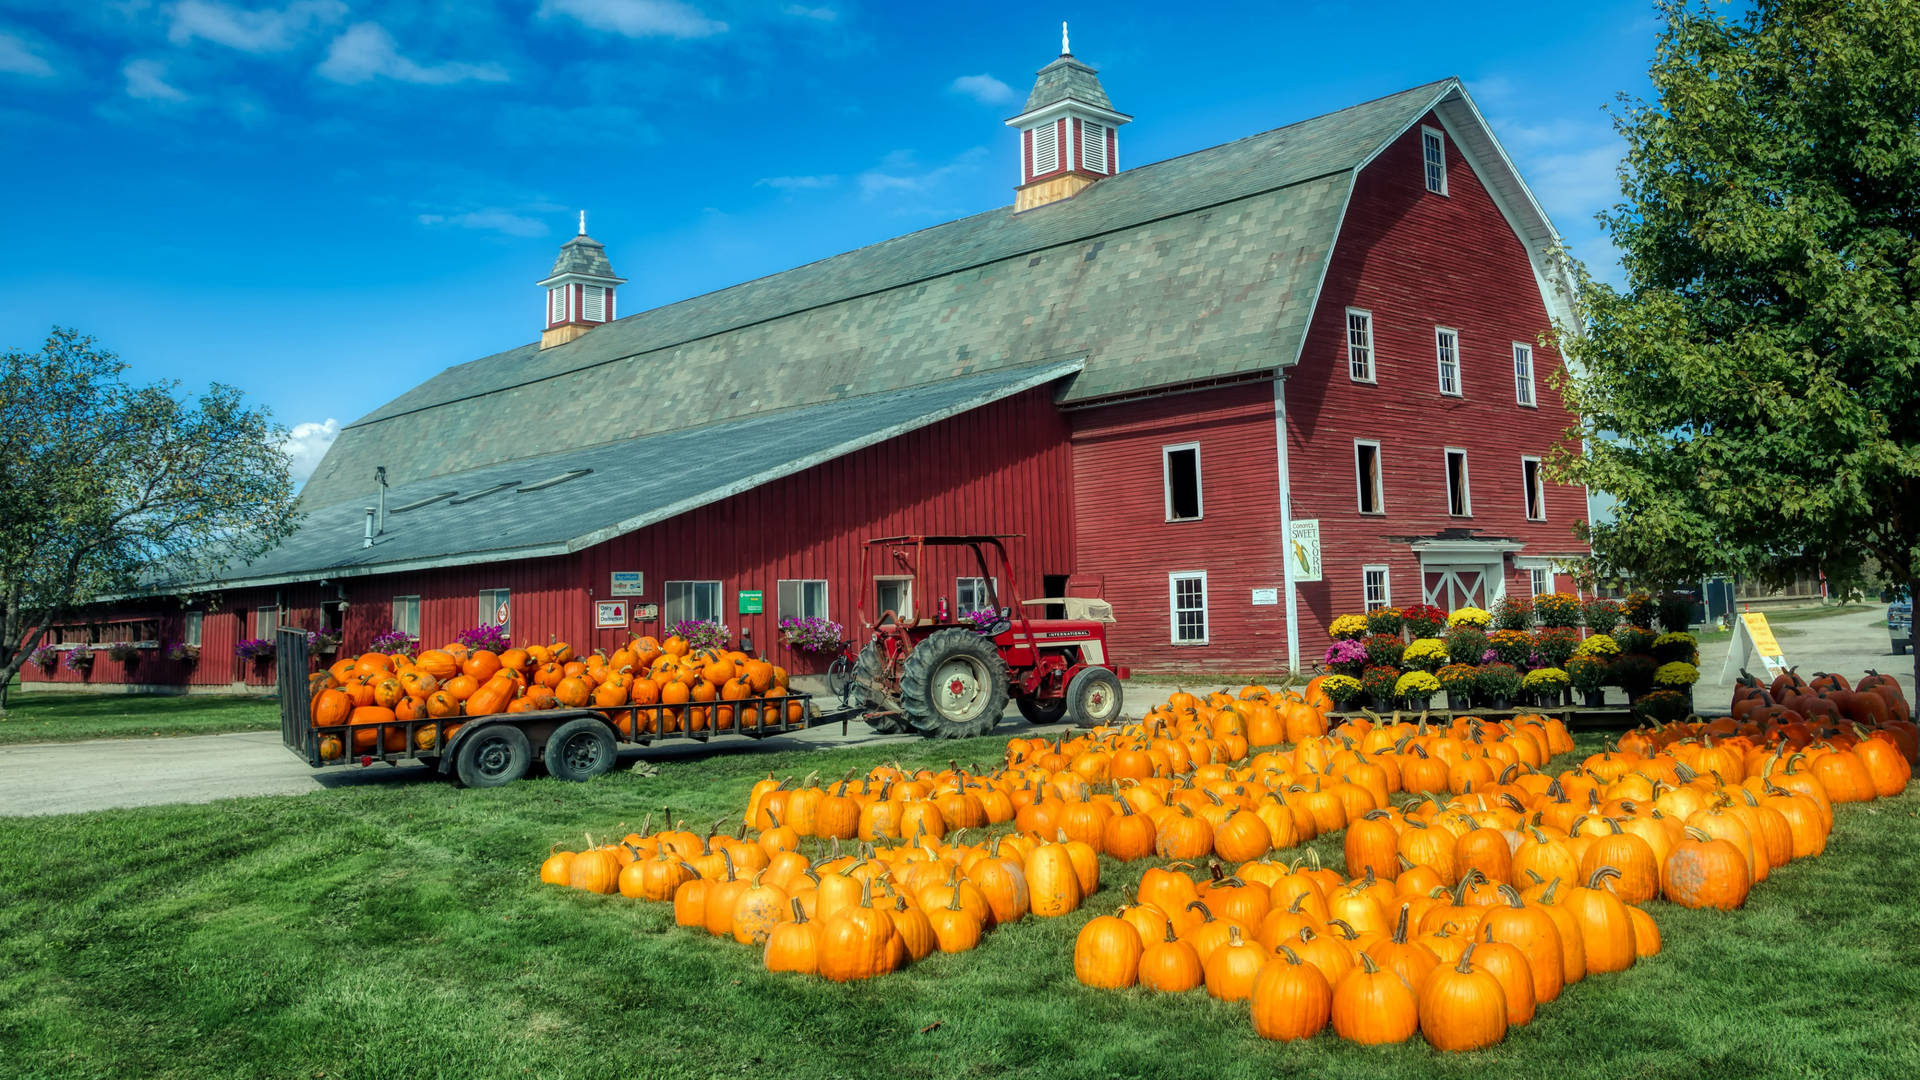 Vermont Red Barn And Pumpkins